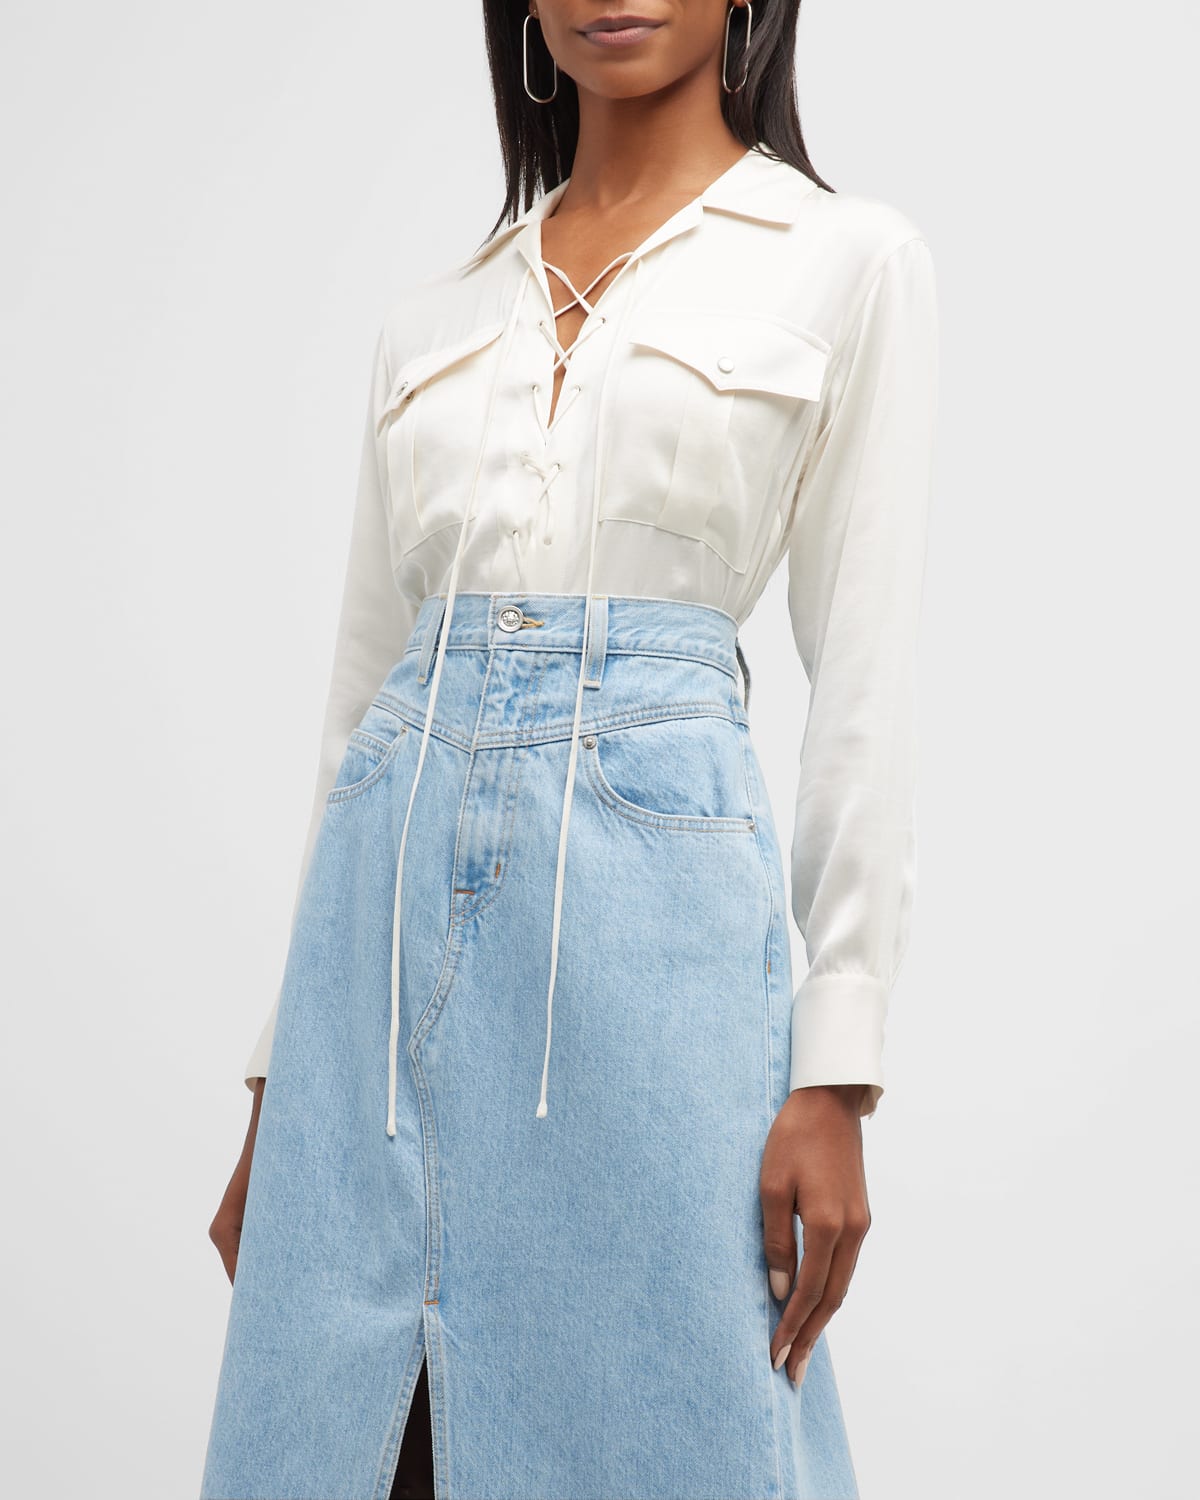 Mojave Lace-Up Collared Shirt